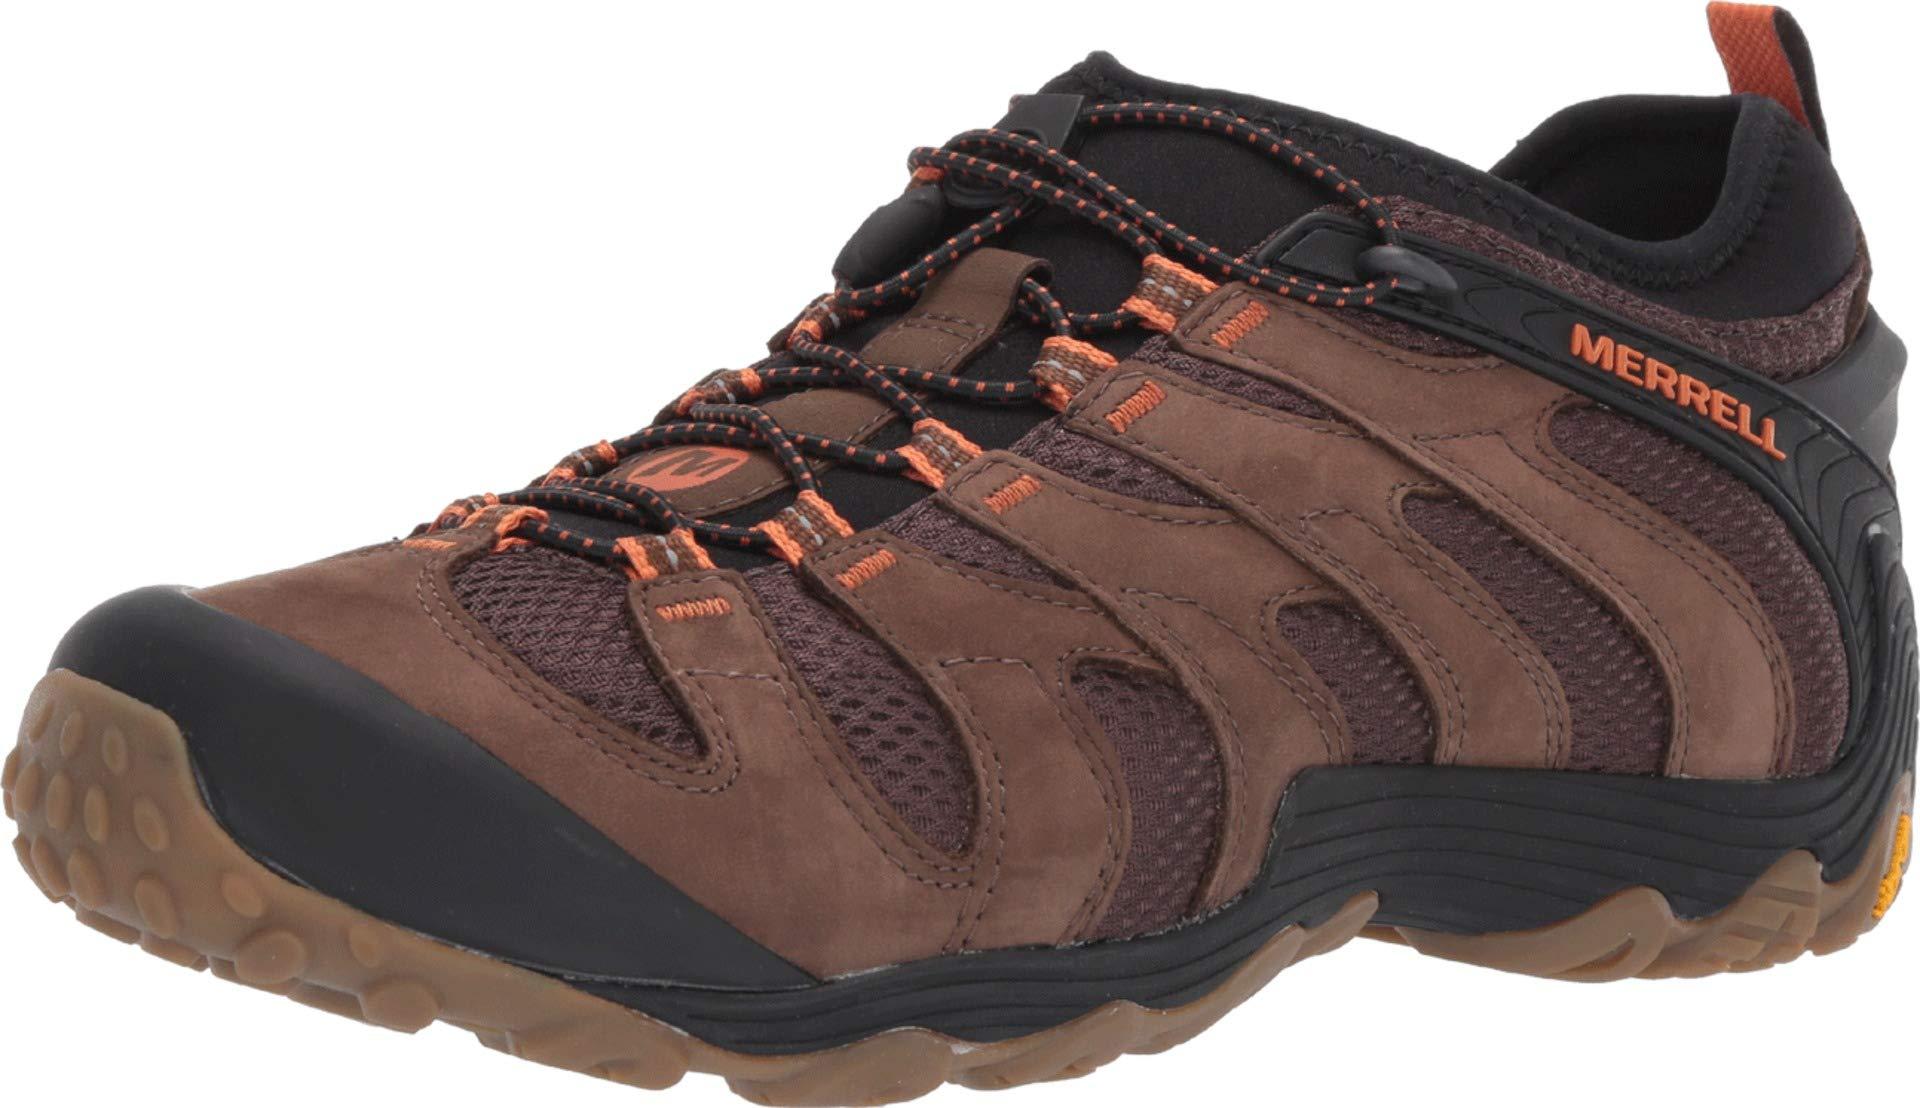 Merrell Leather Chameleon 7 Stretch in Brown for Men - Lyst